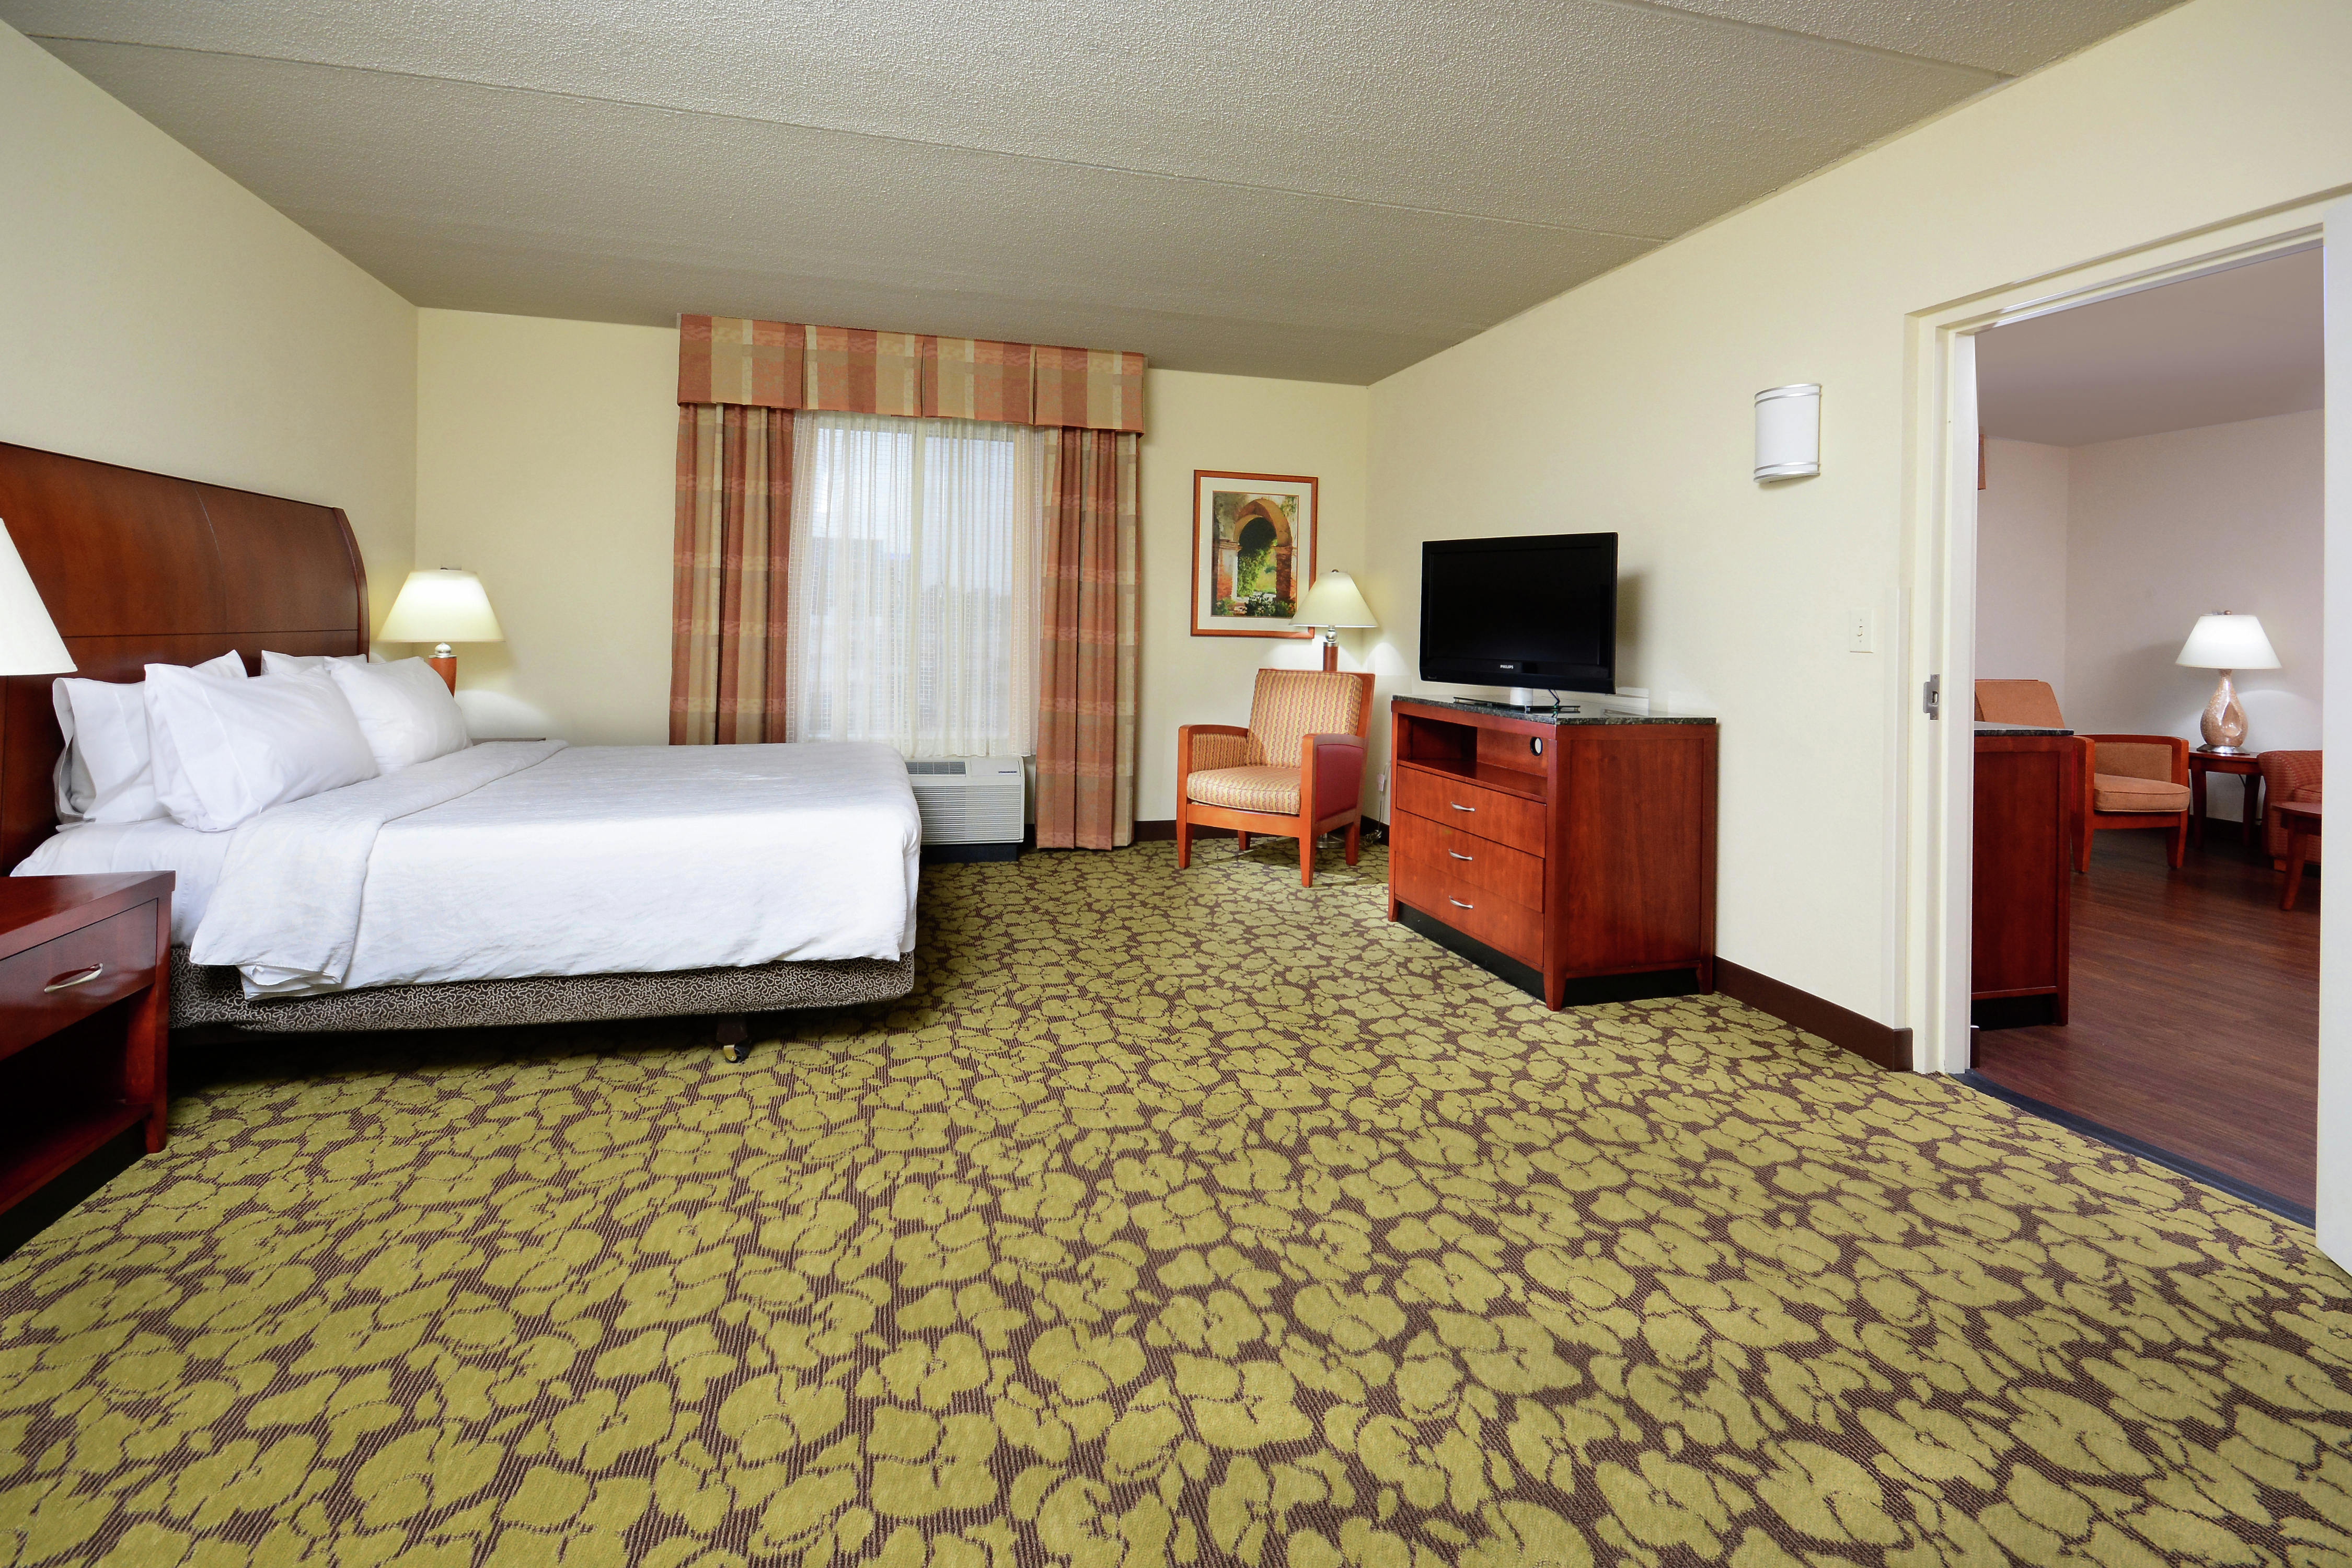 Guest Suite with King Bed, Television and Separate Lounge Area